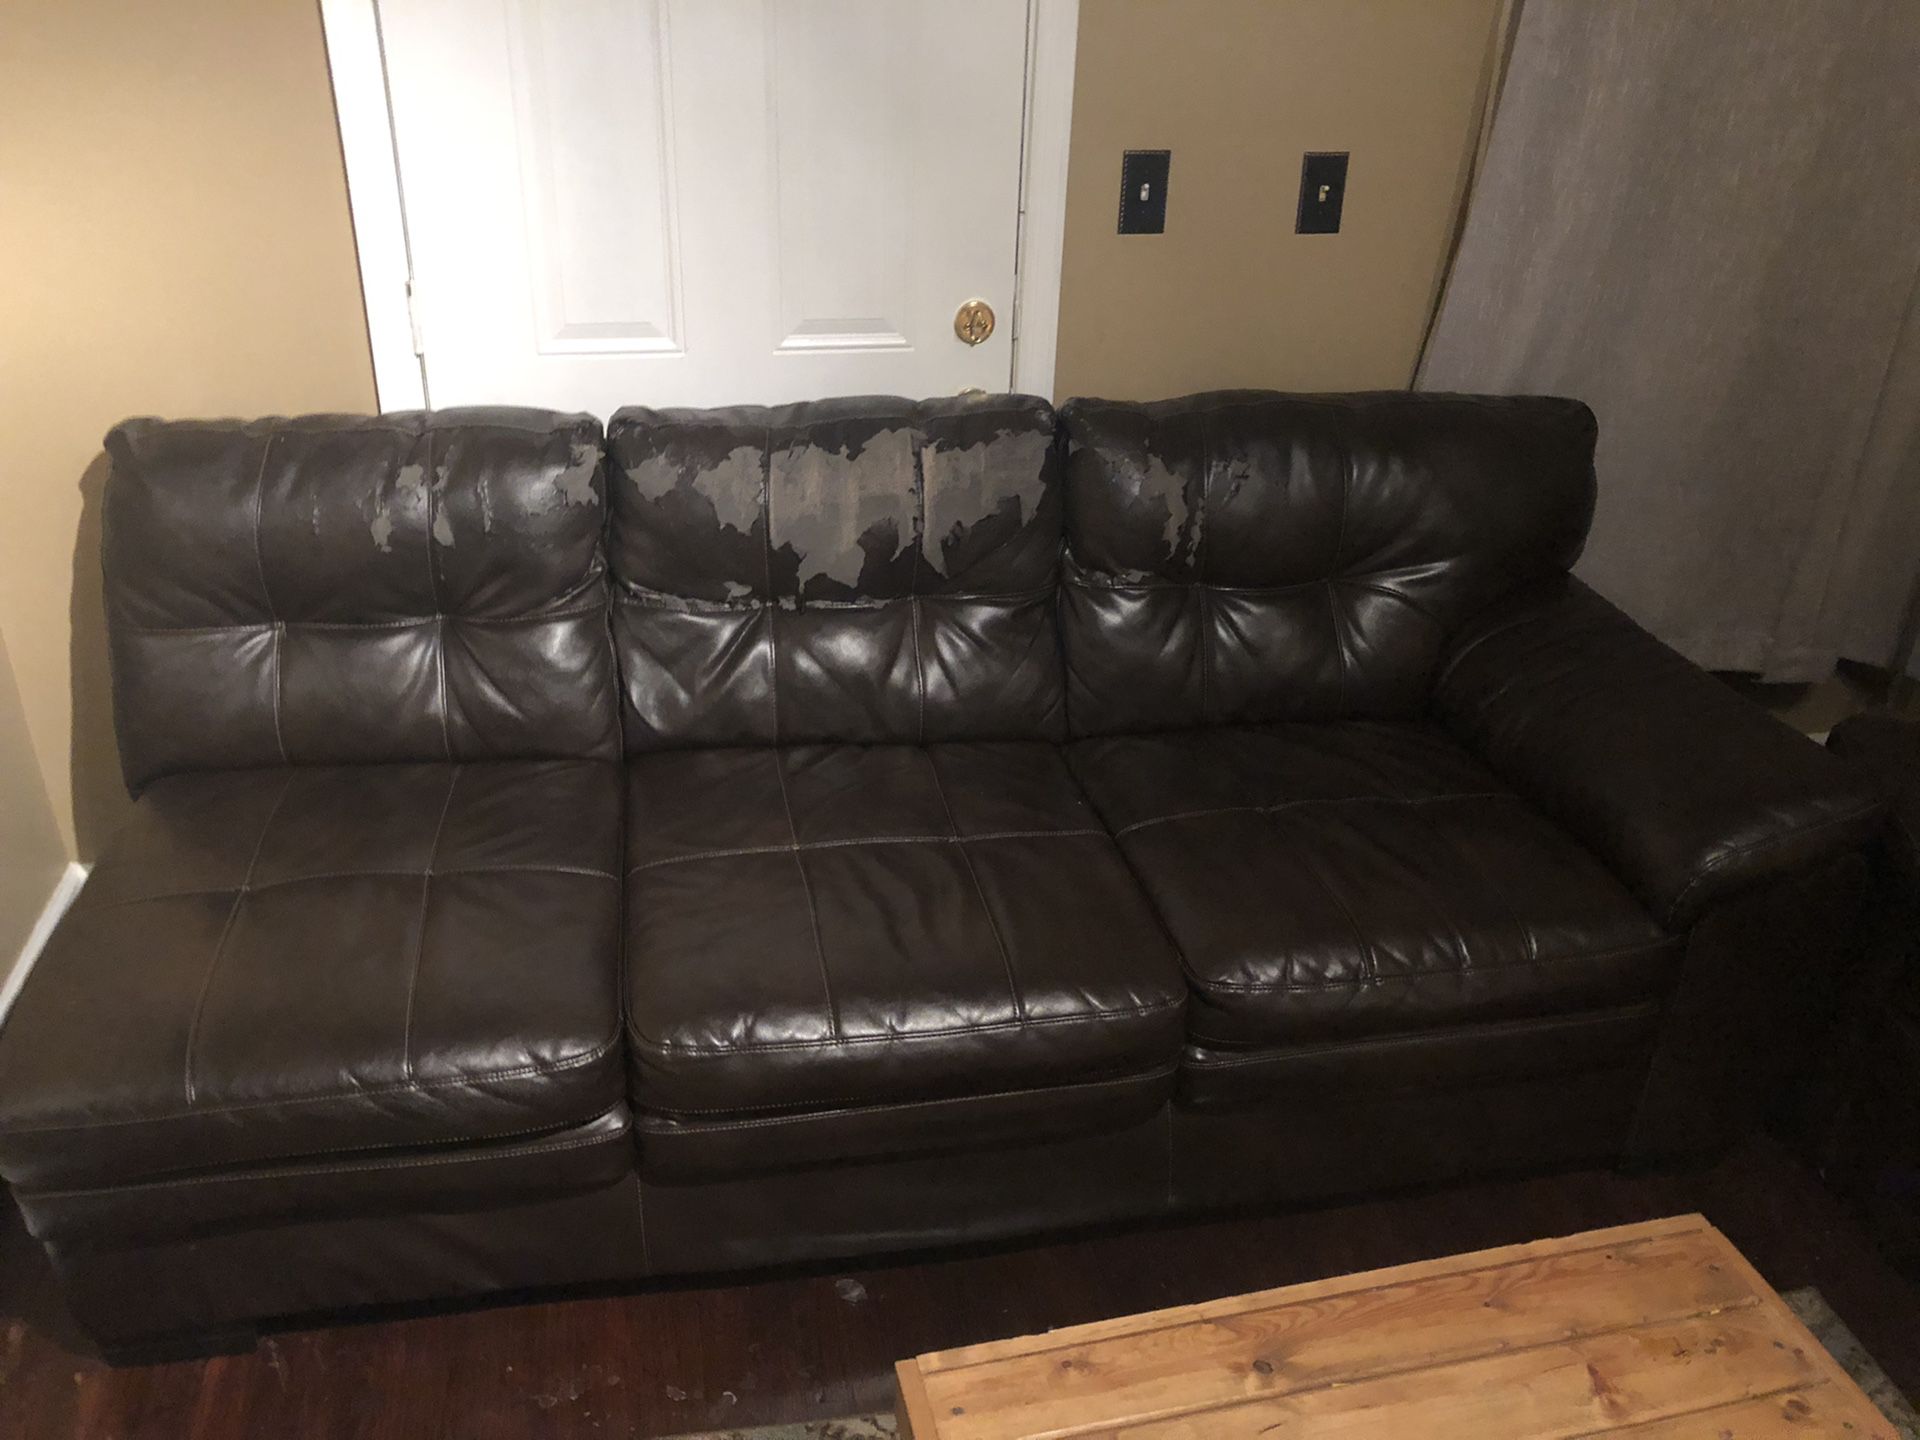 Free couch - come pick up